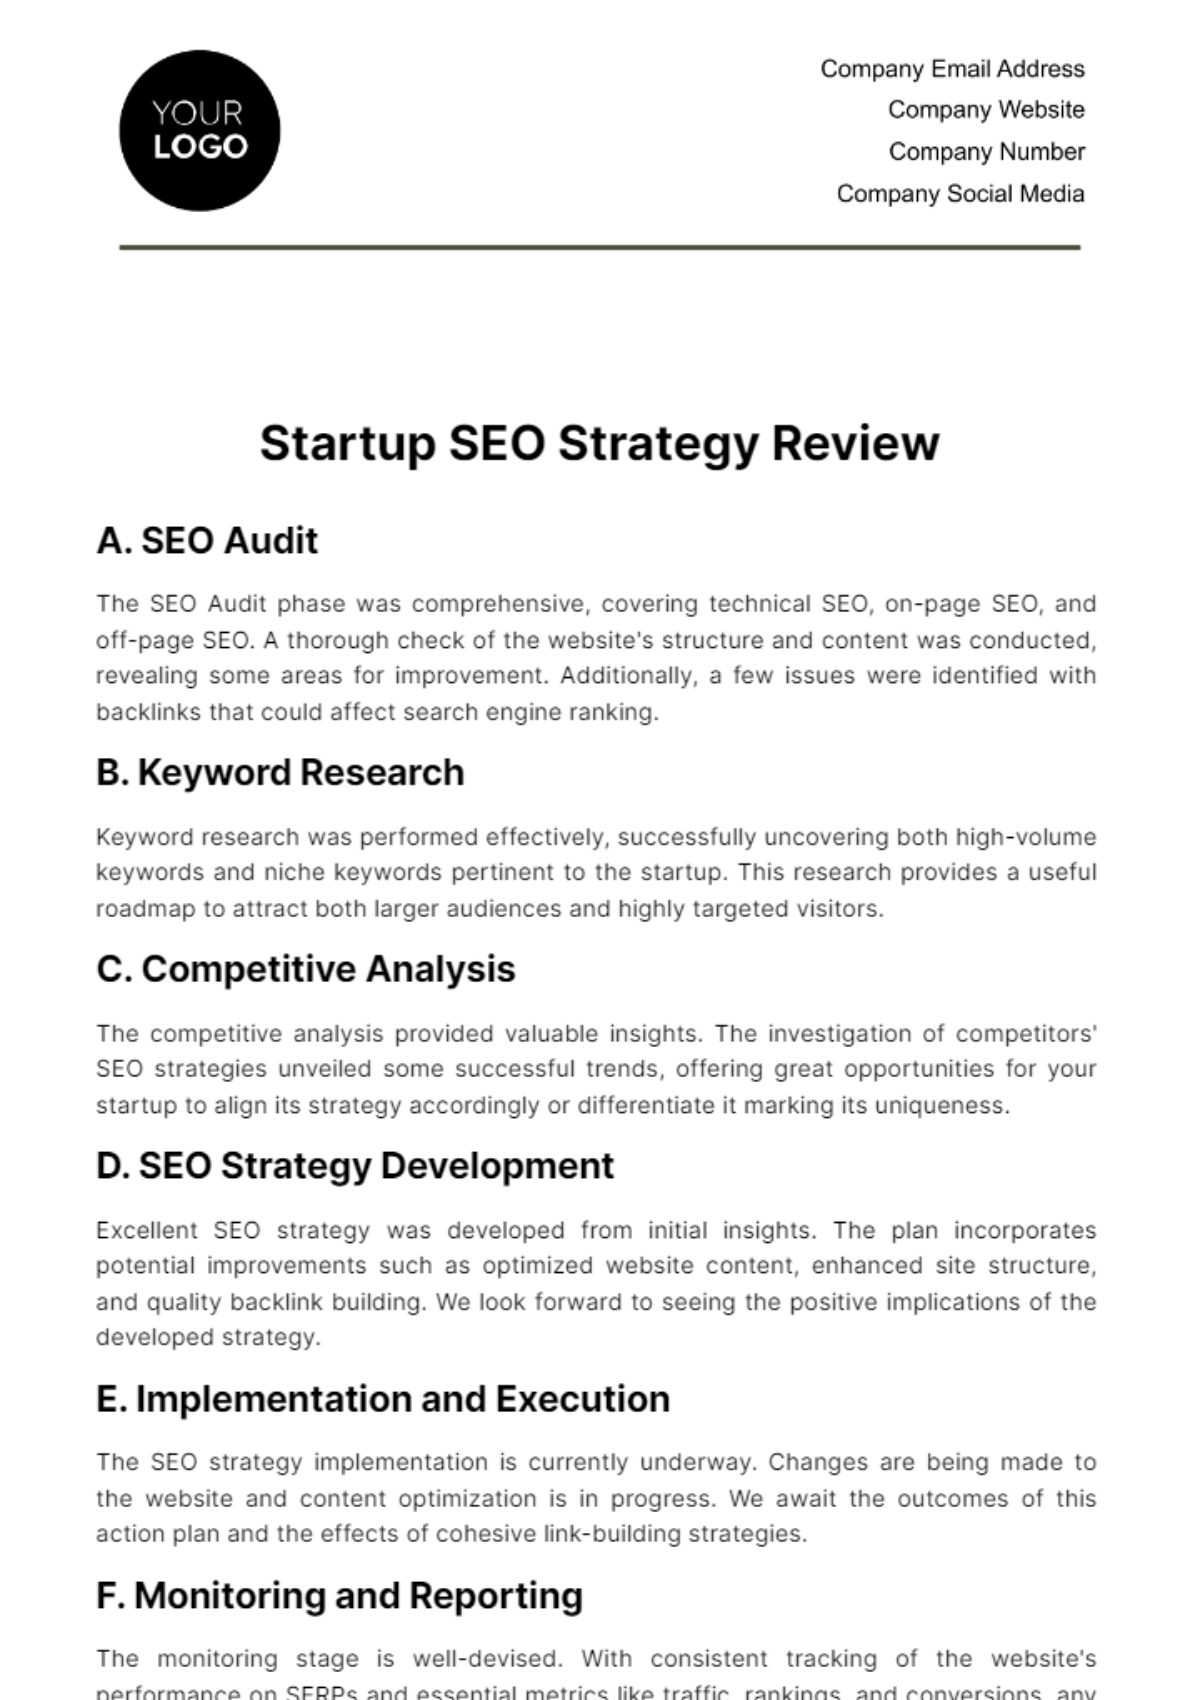 Free Startup SEO Strategy Review Template